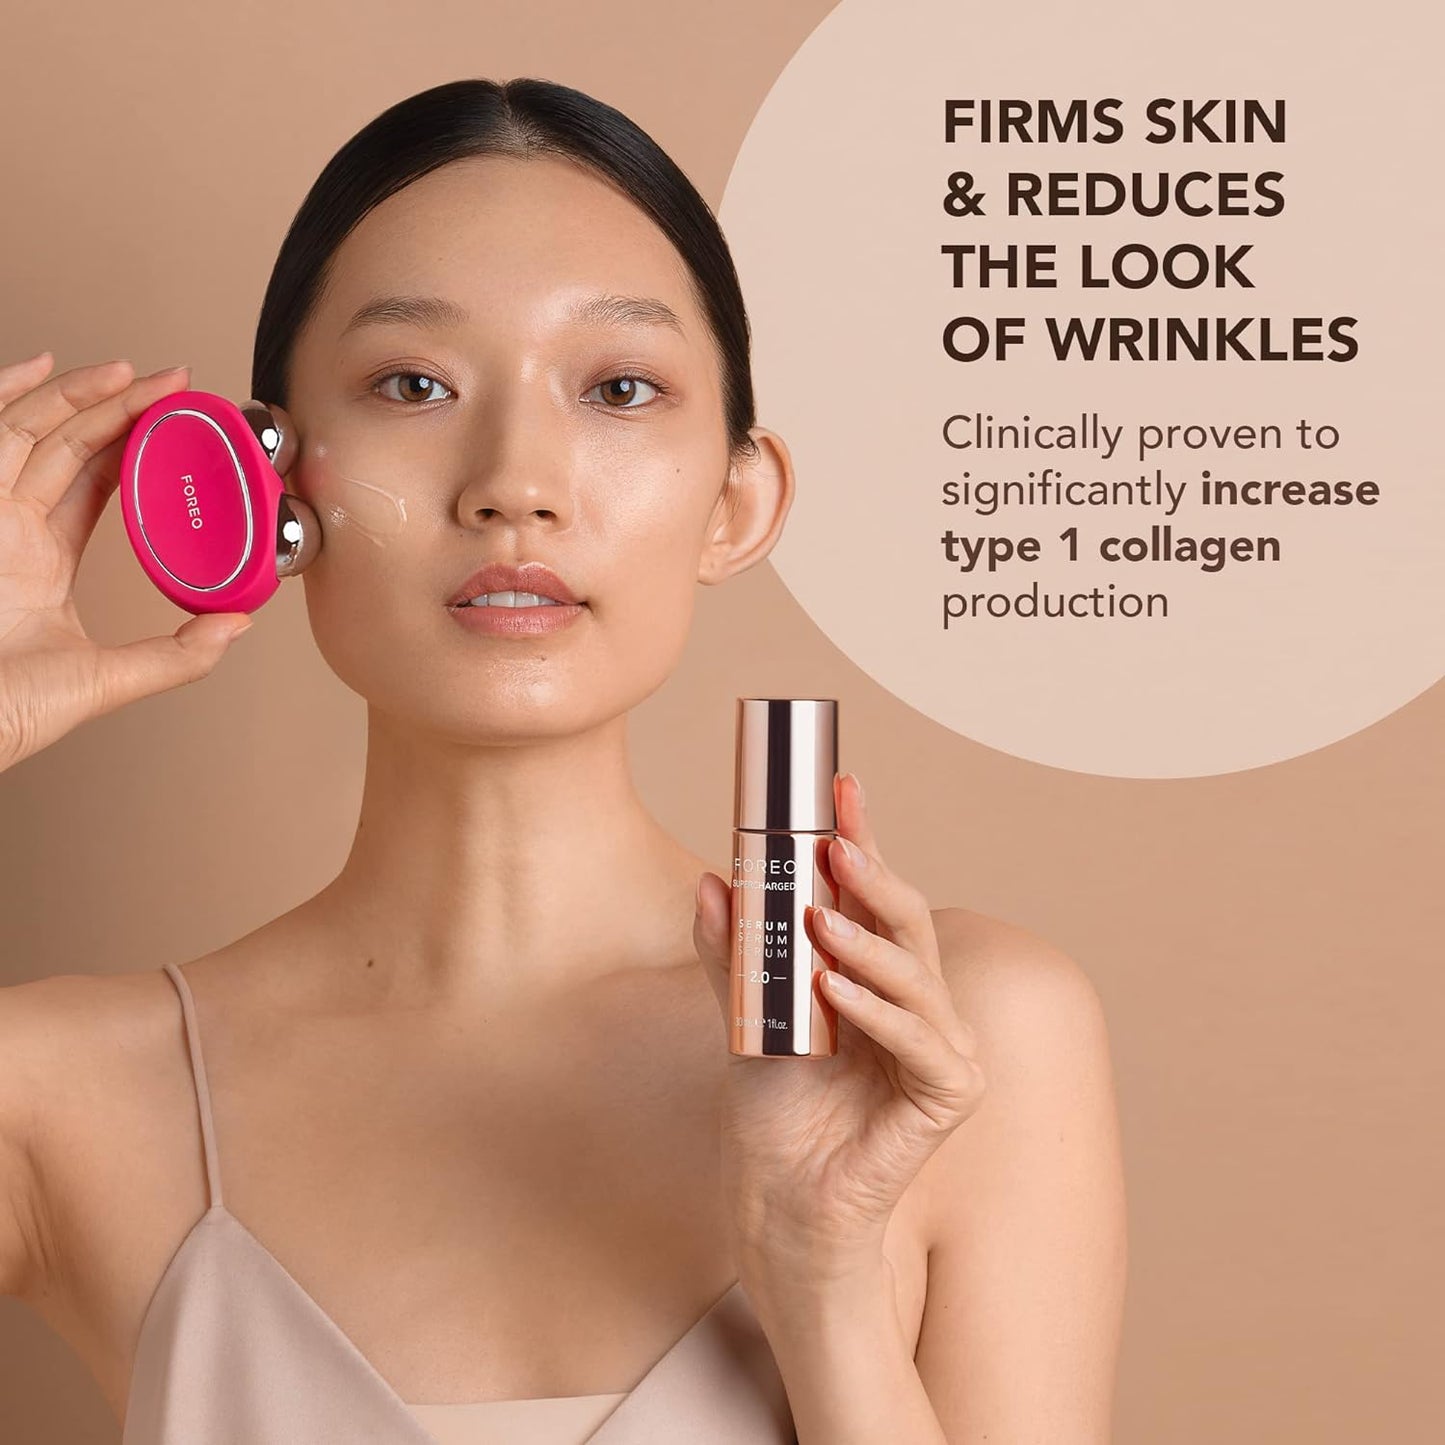 Load image into Gallery viewer, FOREO SUPERCHARGED SERUM 2.0 - Anti-aging Face Serum - Conductive Gel - Moisturizing Face Care - Hyaluronic Acid &amp;amp; Squalane - Vegan &amp;amp; Cruelty-free - All Skin Types - 30ml
